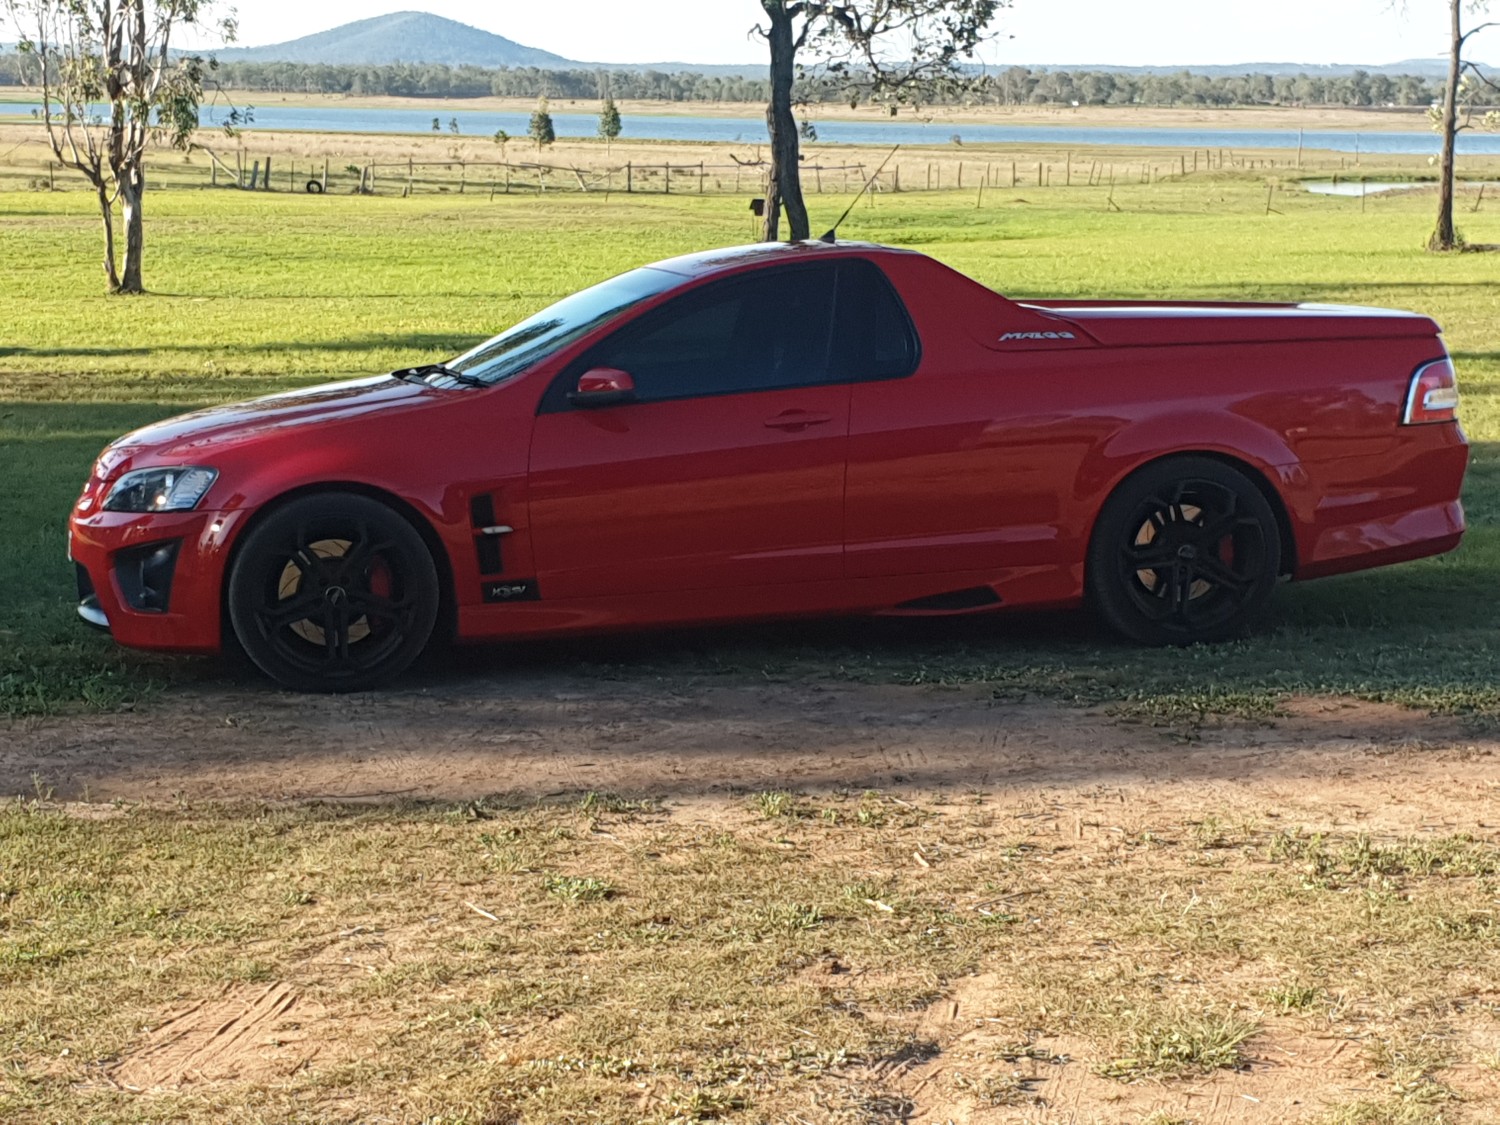 2008 Holden Special Vehicles MALOO R8